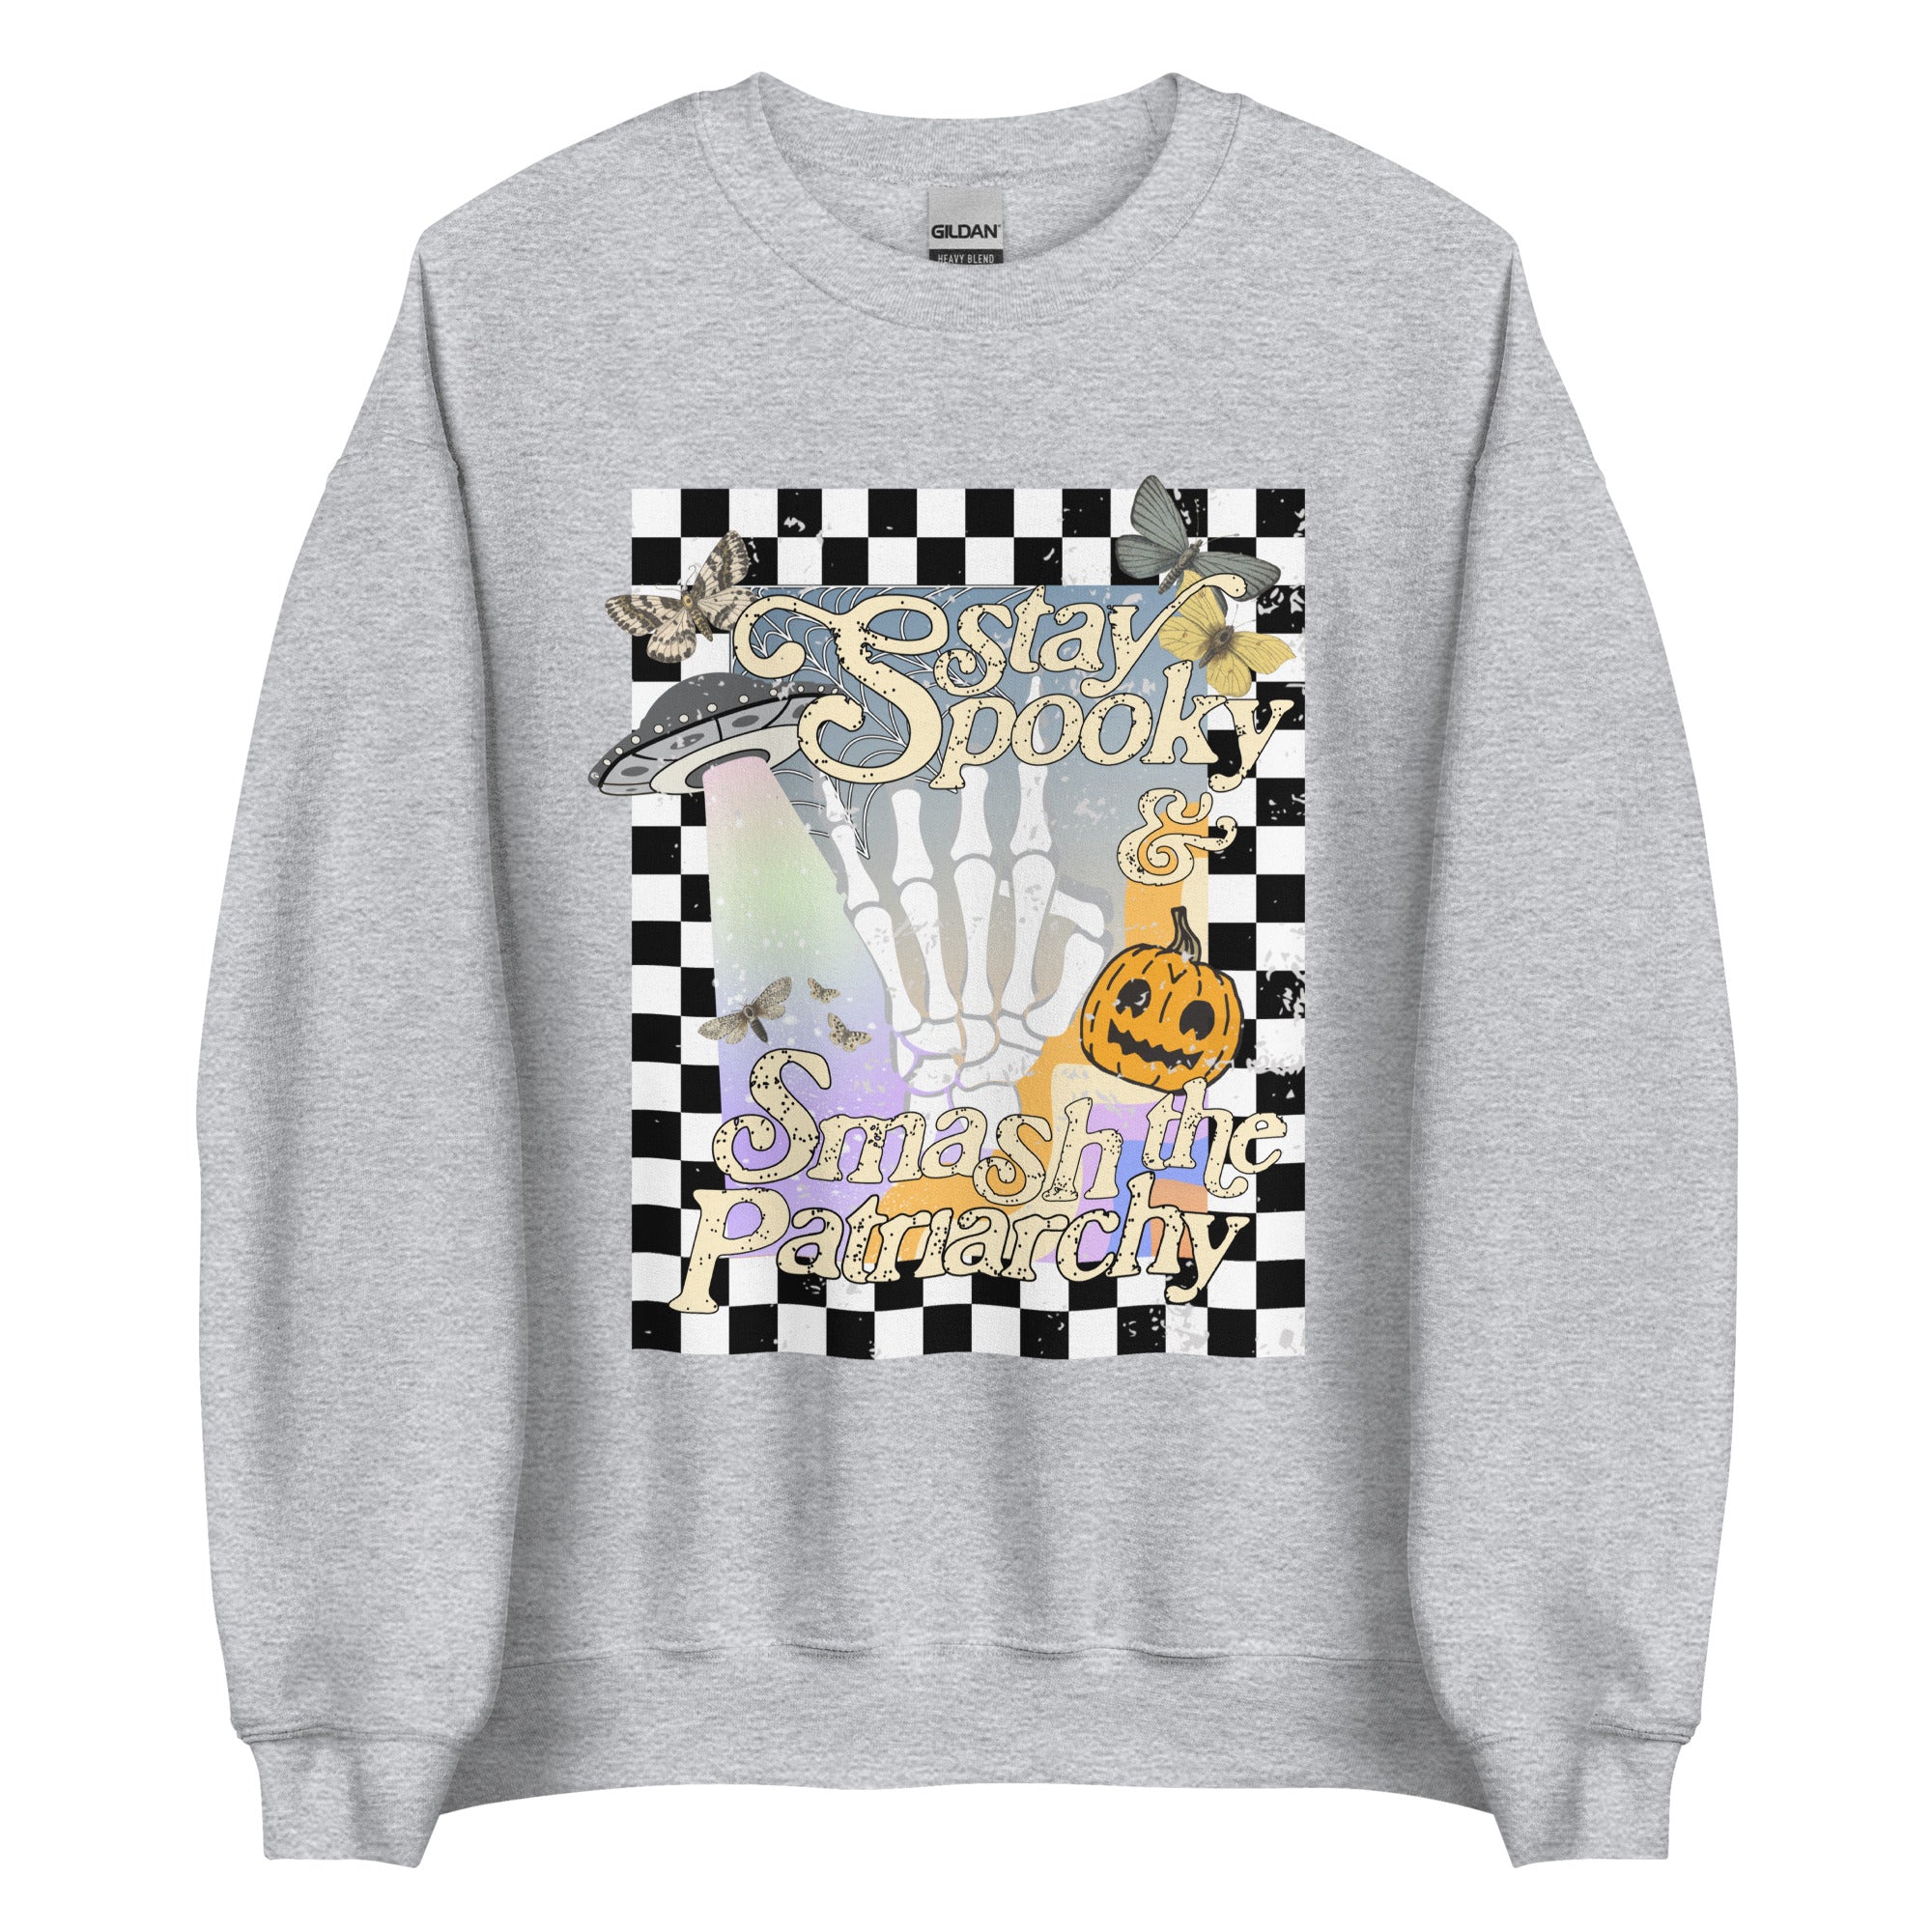 Stay Spooky and Smash the Patriarchy Crewneck